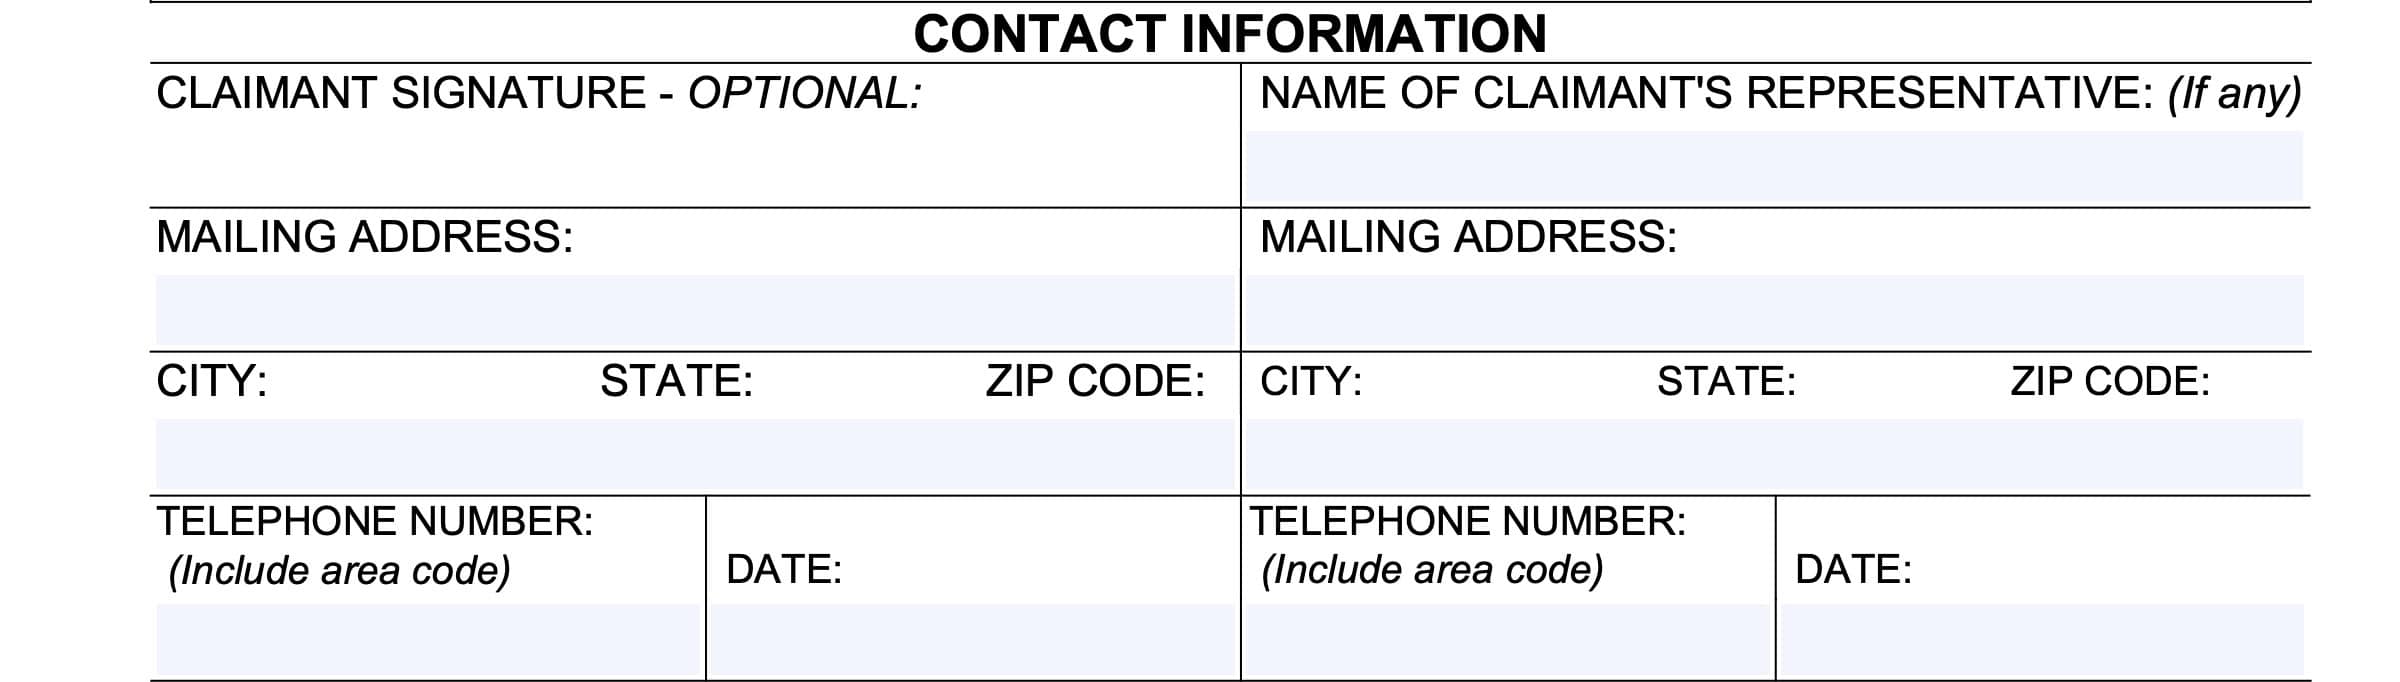 claimant contact information fields